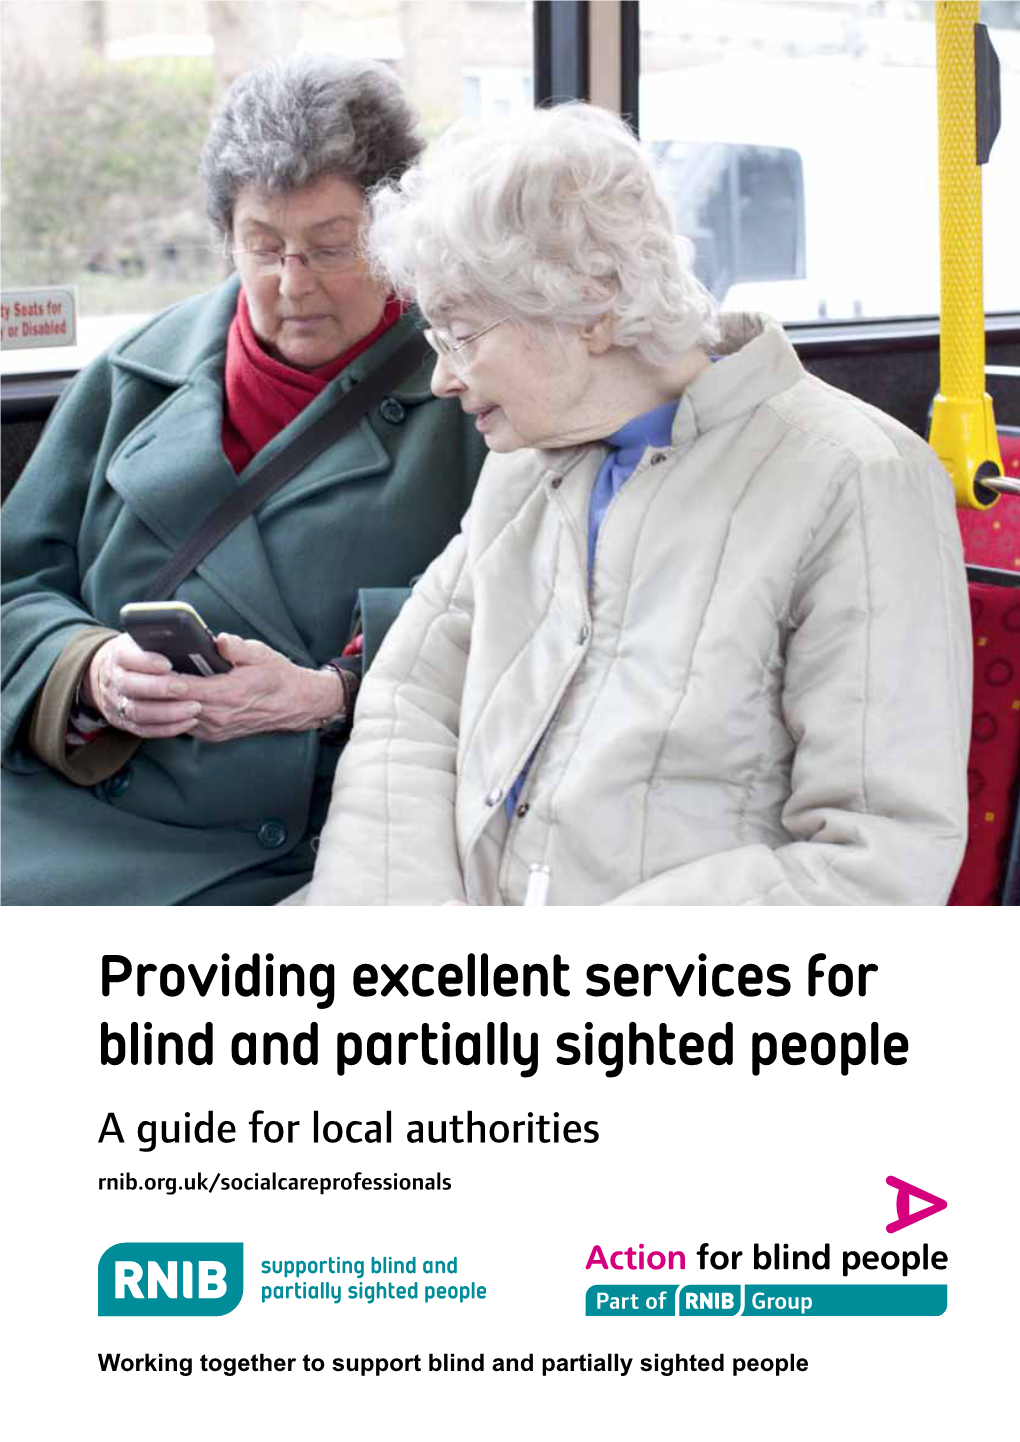 Providing Excellent Services for Blind and Partially Sighted People a Guide for Local Authorities Rnib.Org.Uk/Socialcareprofessionals